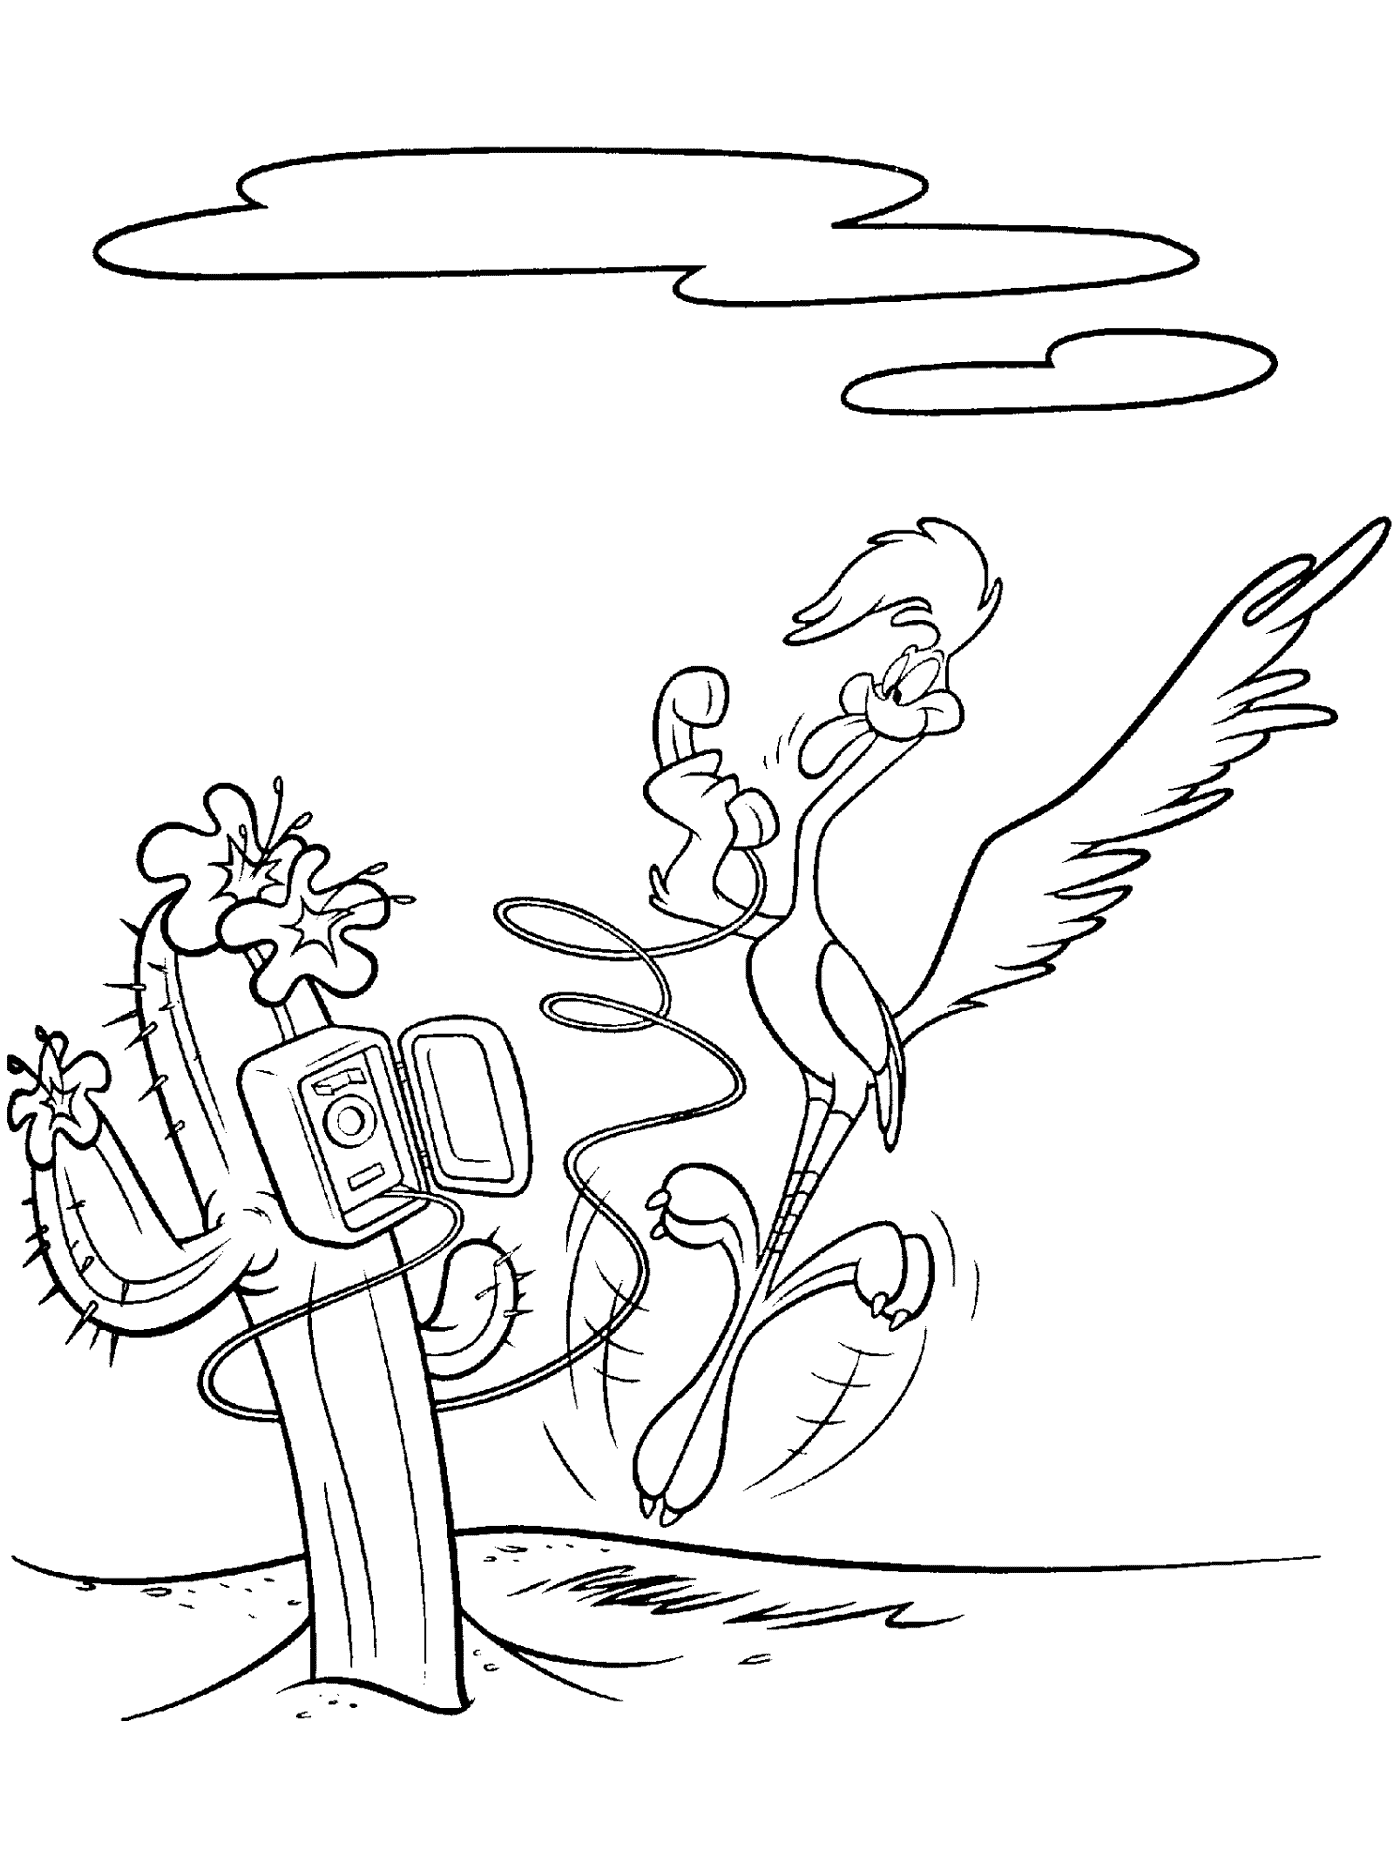 Coloring page: Road Runner and Wile E. Coyote (Cartoons) #47233 - Free Printable Coloring Pages